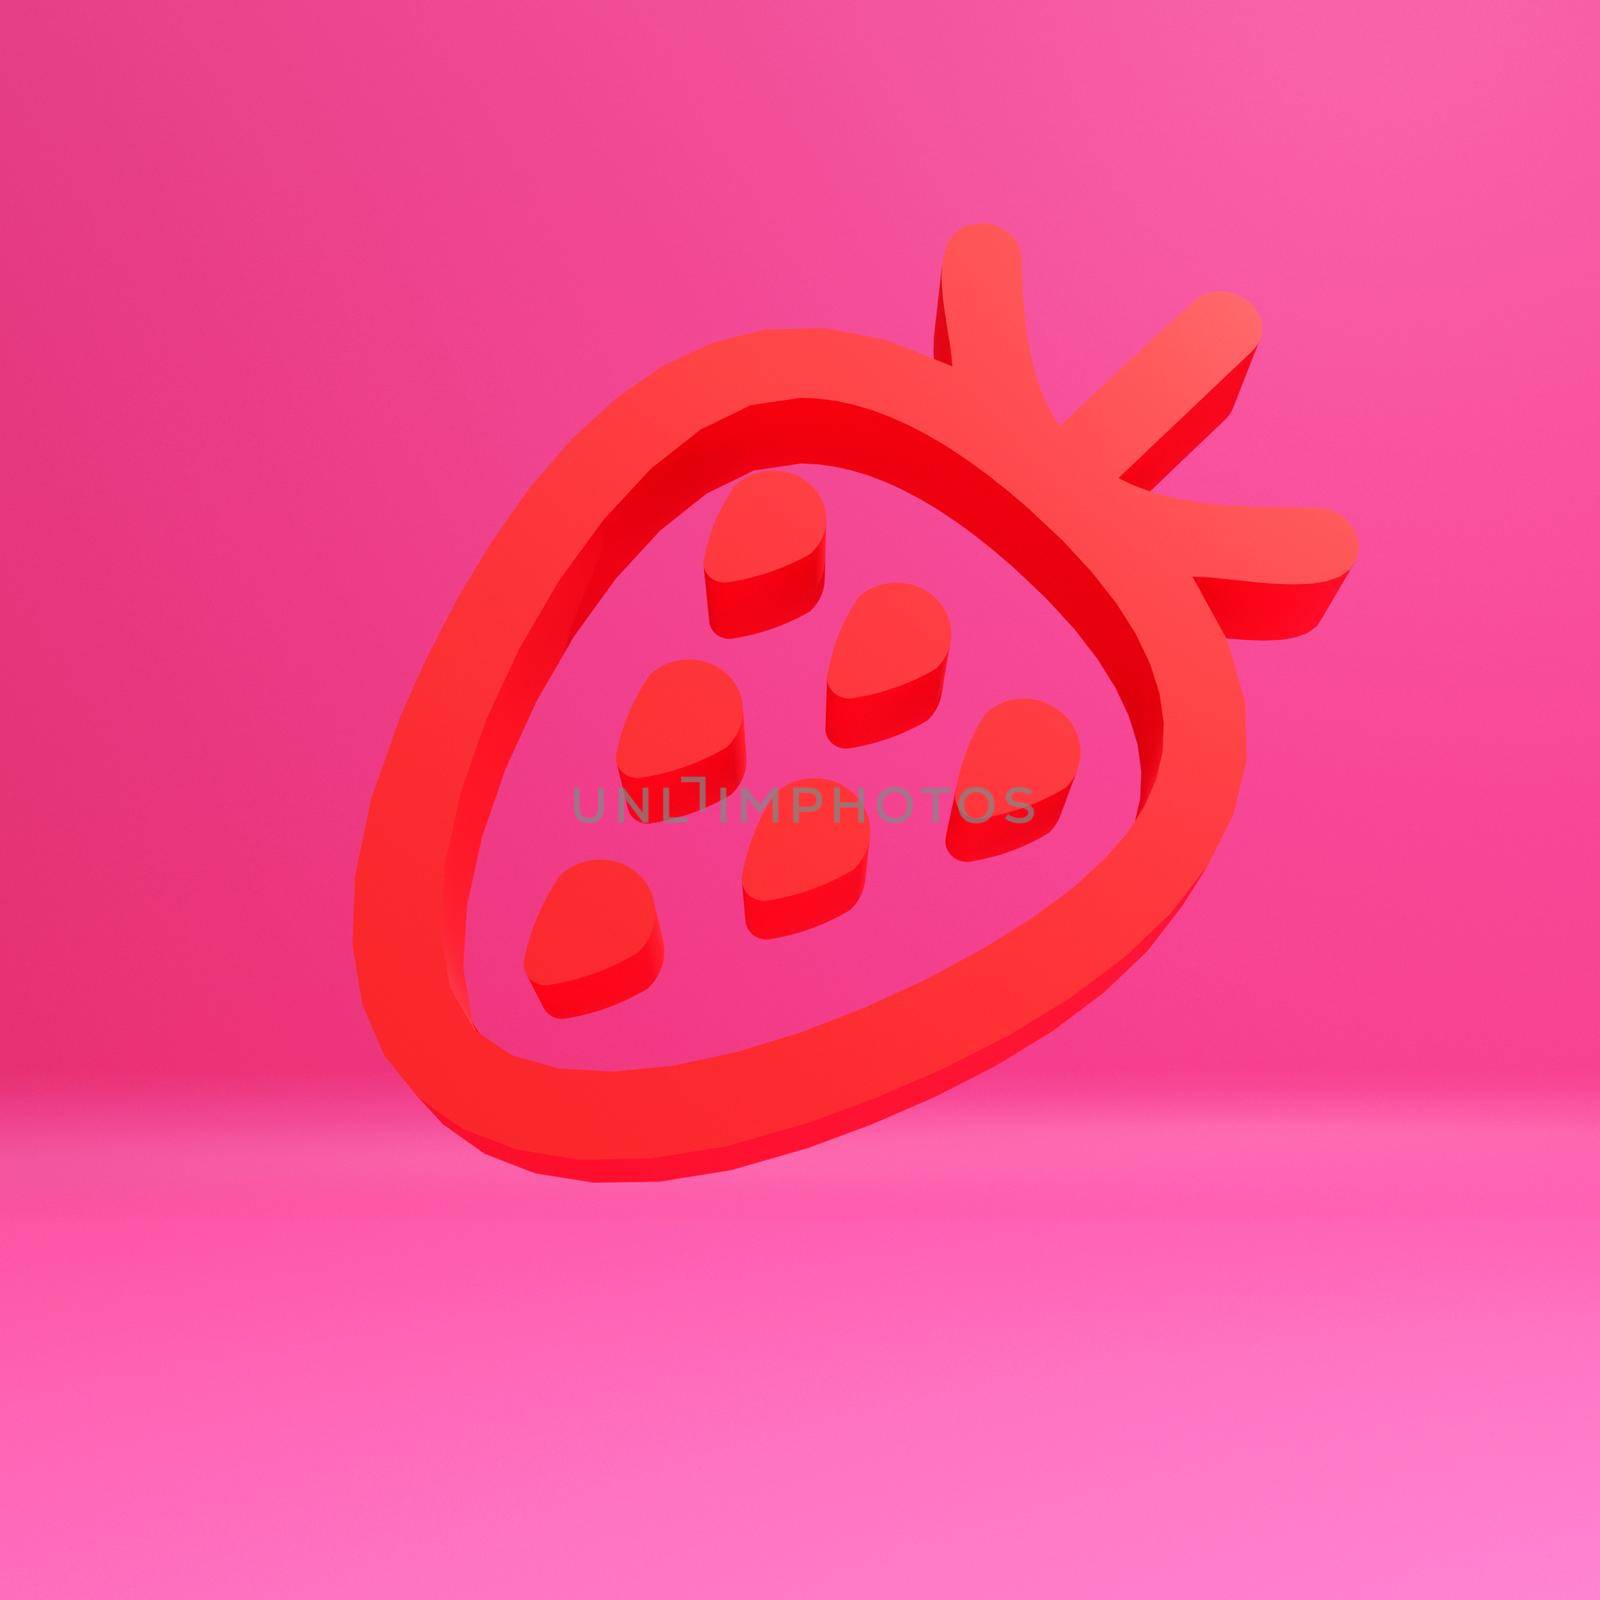 Strawberry 3d icon, isolated on pink background.